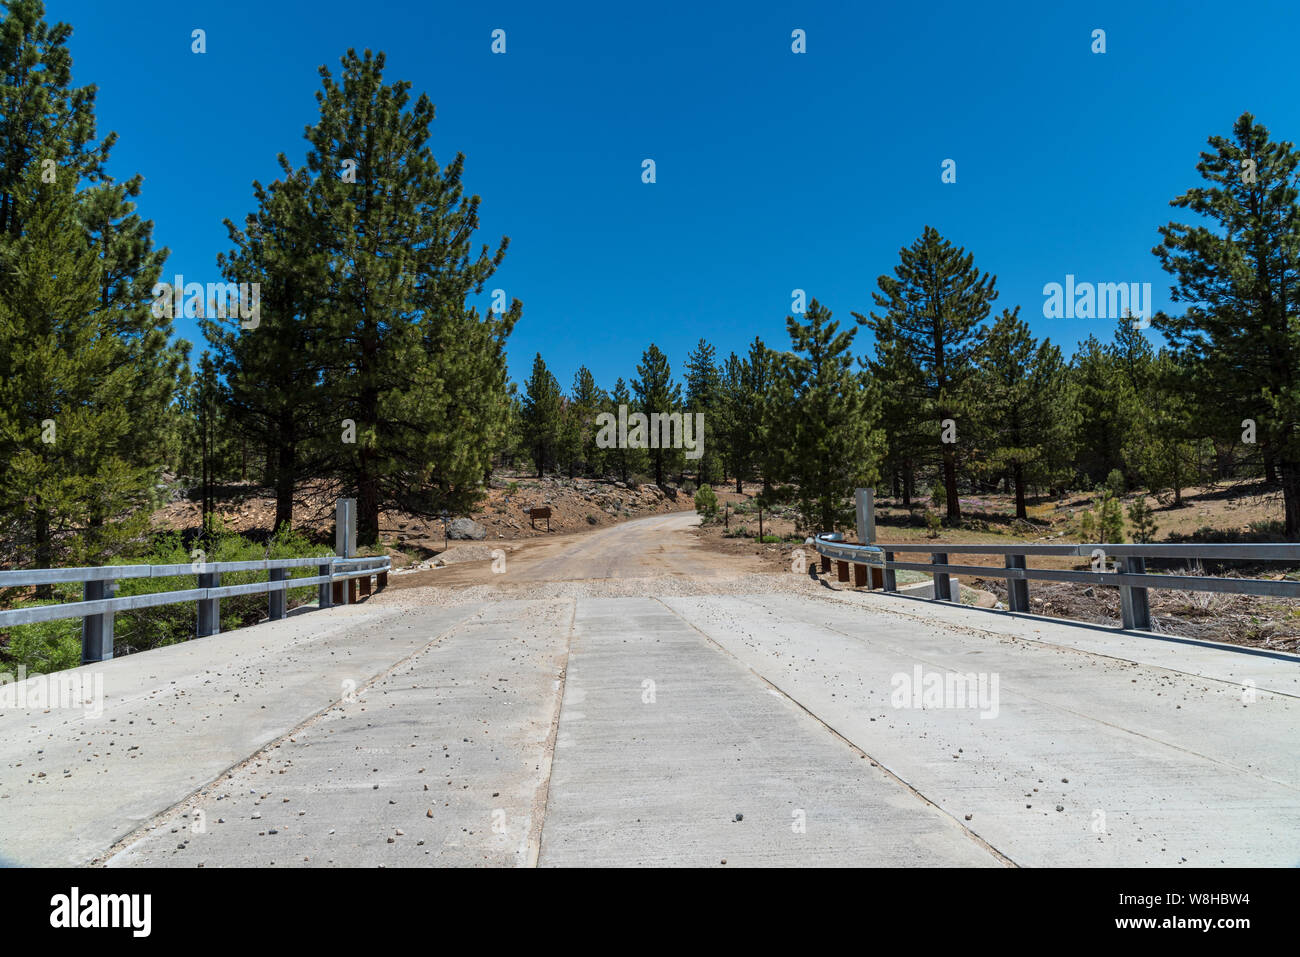 Cement bridge with guard rails leading to dirt road with tall pine trees on either side under bright blue sky. Stock Photo